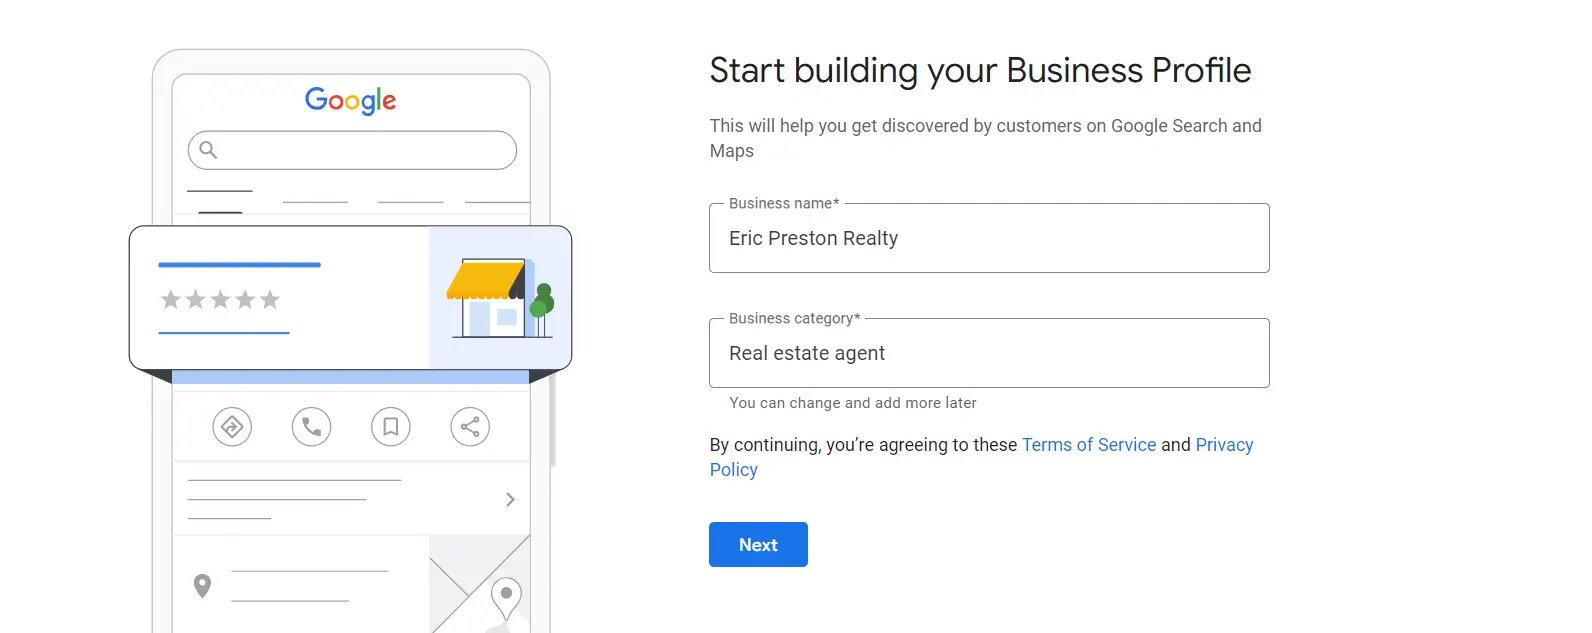 Google My Business "Start building your Business Profile" page. Two fields: Business name" and "Business category" above a blue "Next" button. 